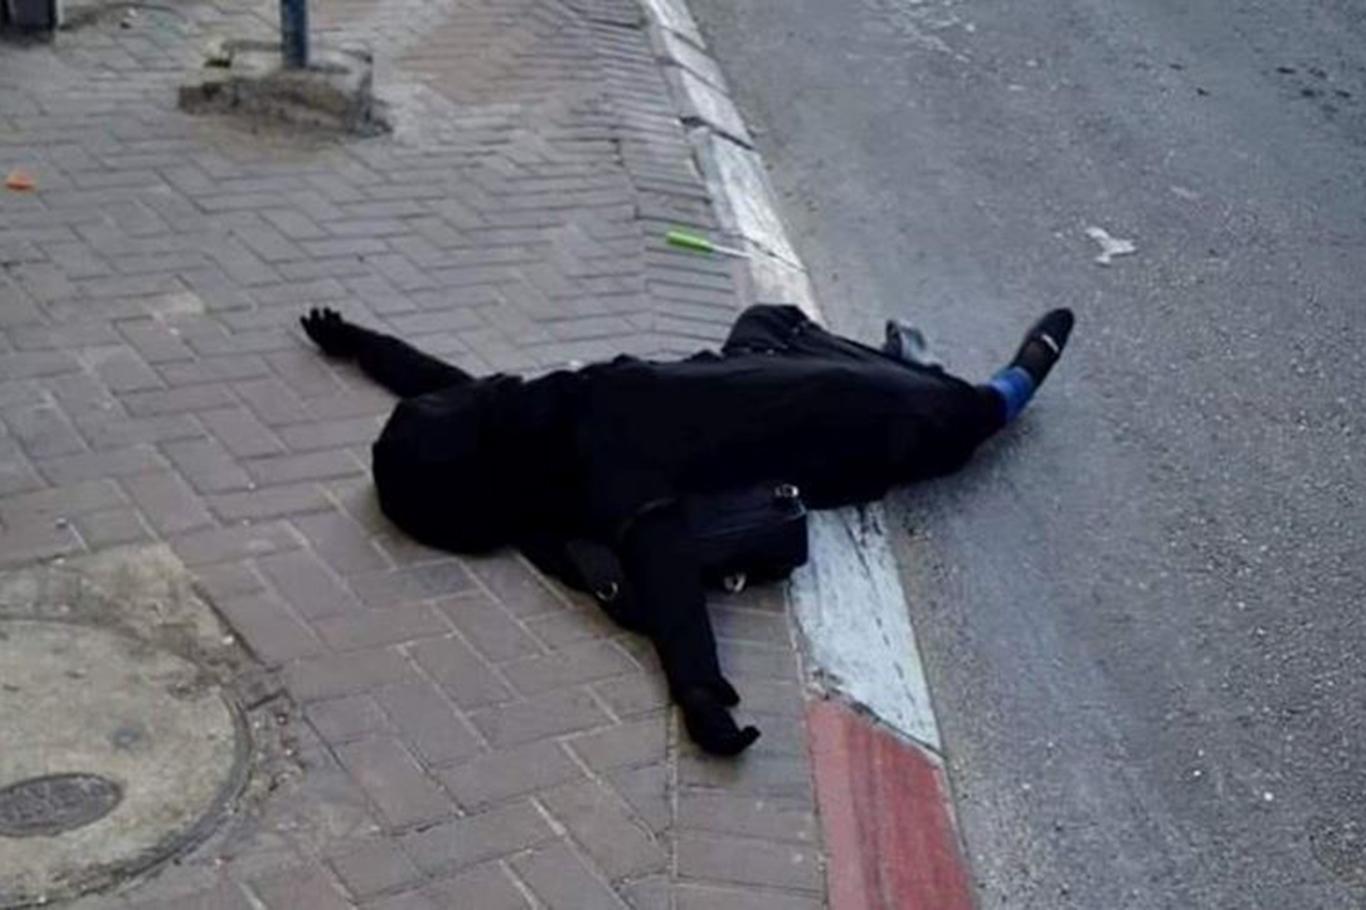 Young Palestinian girl martyred by zionist gangs